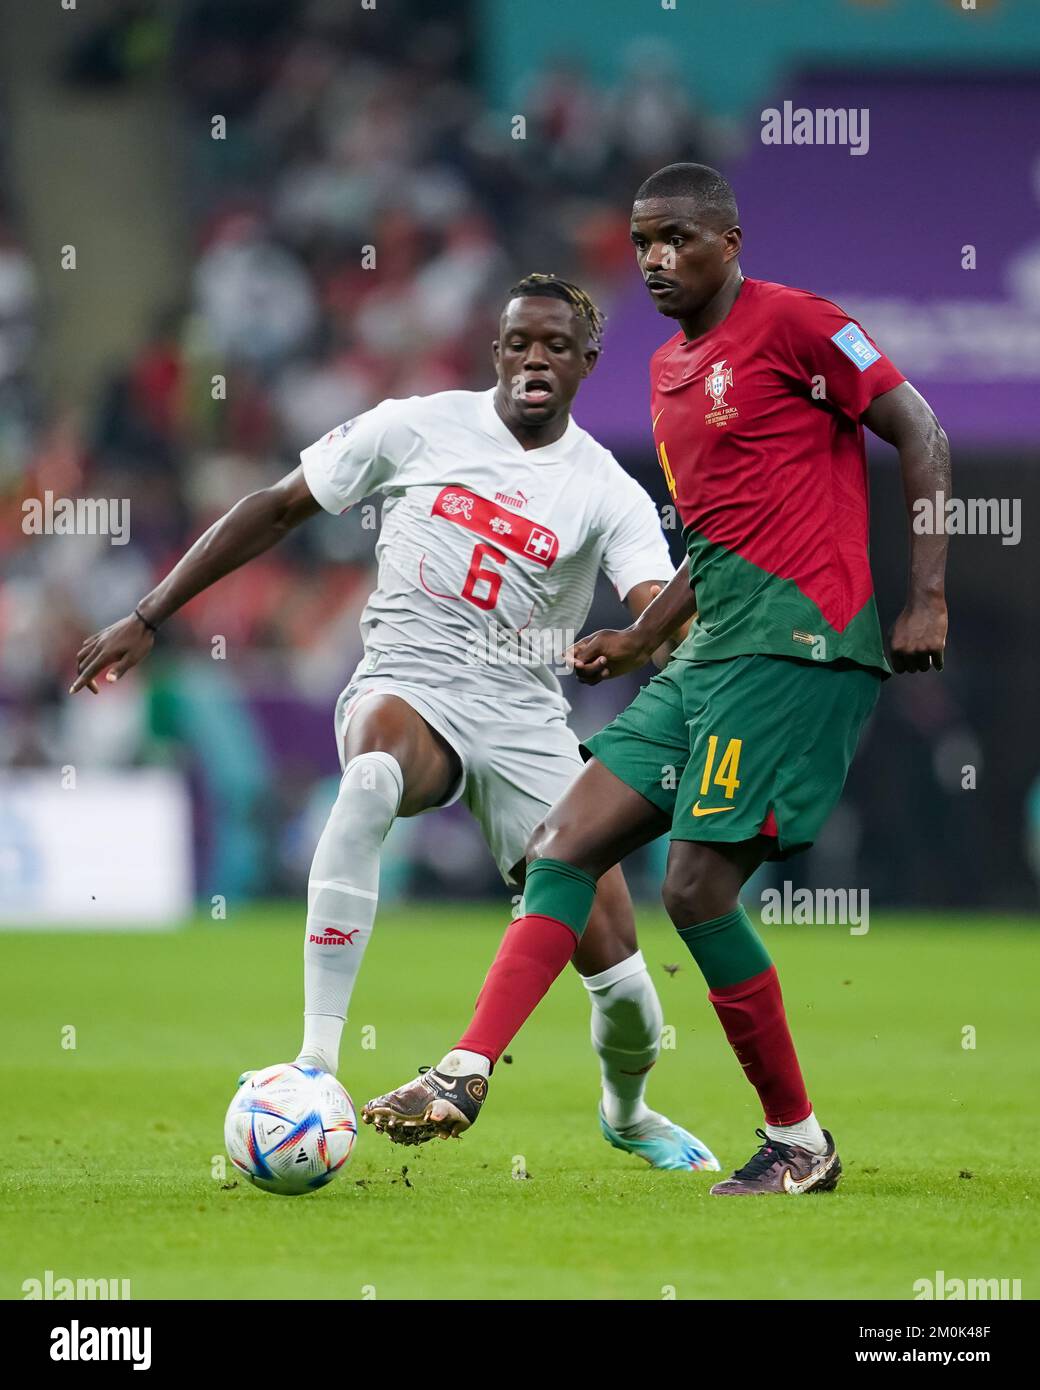 LUSAIL, QATAR - DECEMBER 6: Player of Portugal William Carvalho fights for the ball with player of Switzerland Denis Zakaria during the FIFA World Cup Qatar 2022 Round of 16 match between Portugal and Switzerland at Lusail Stadium on December 6, 2022 in Lusail, Qatar. (Photo by Florencia Tan Jun/PxImages) Stock Photo